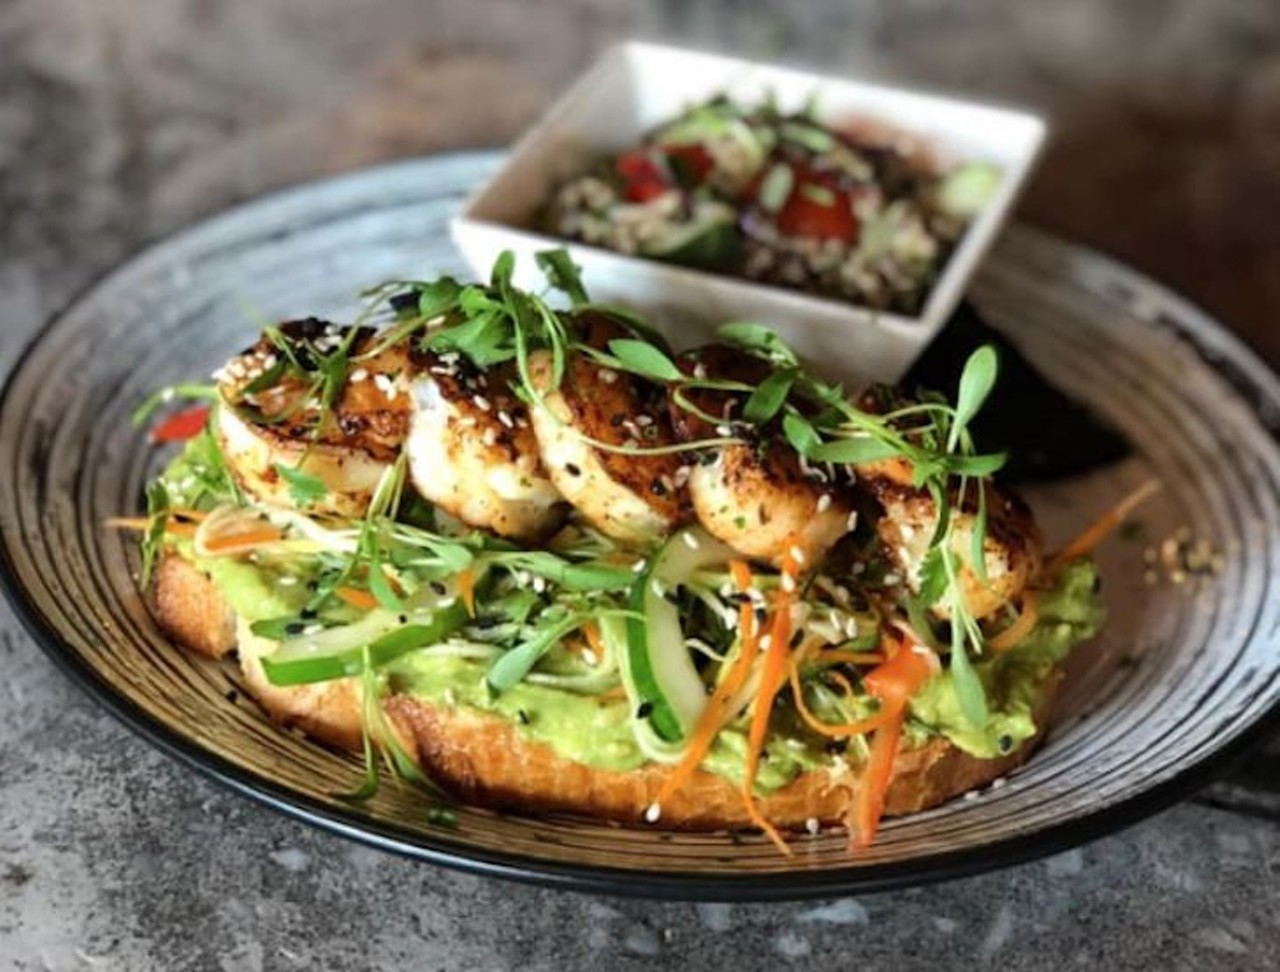 The Stubborn Mule
100 S. Eola Drive 
Shrimp and avocado toast is a lunchtime special at The Stubborn Mule. Grilled sourdough bread smothered with thick avocado is topped with pickled veggies, blackened shrimp and served with quinoa salad.
Photo via Facebook/The Stubborn Mule